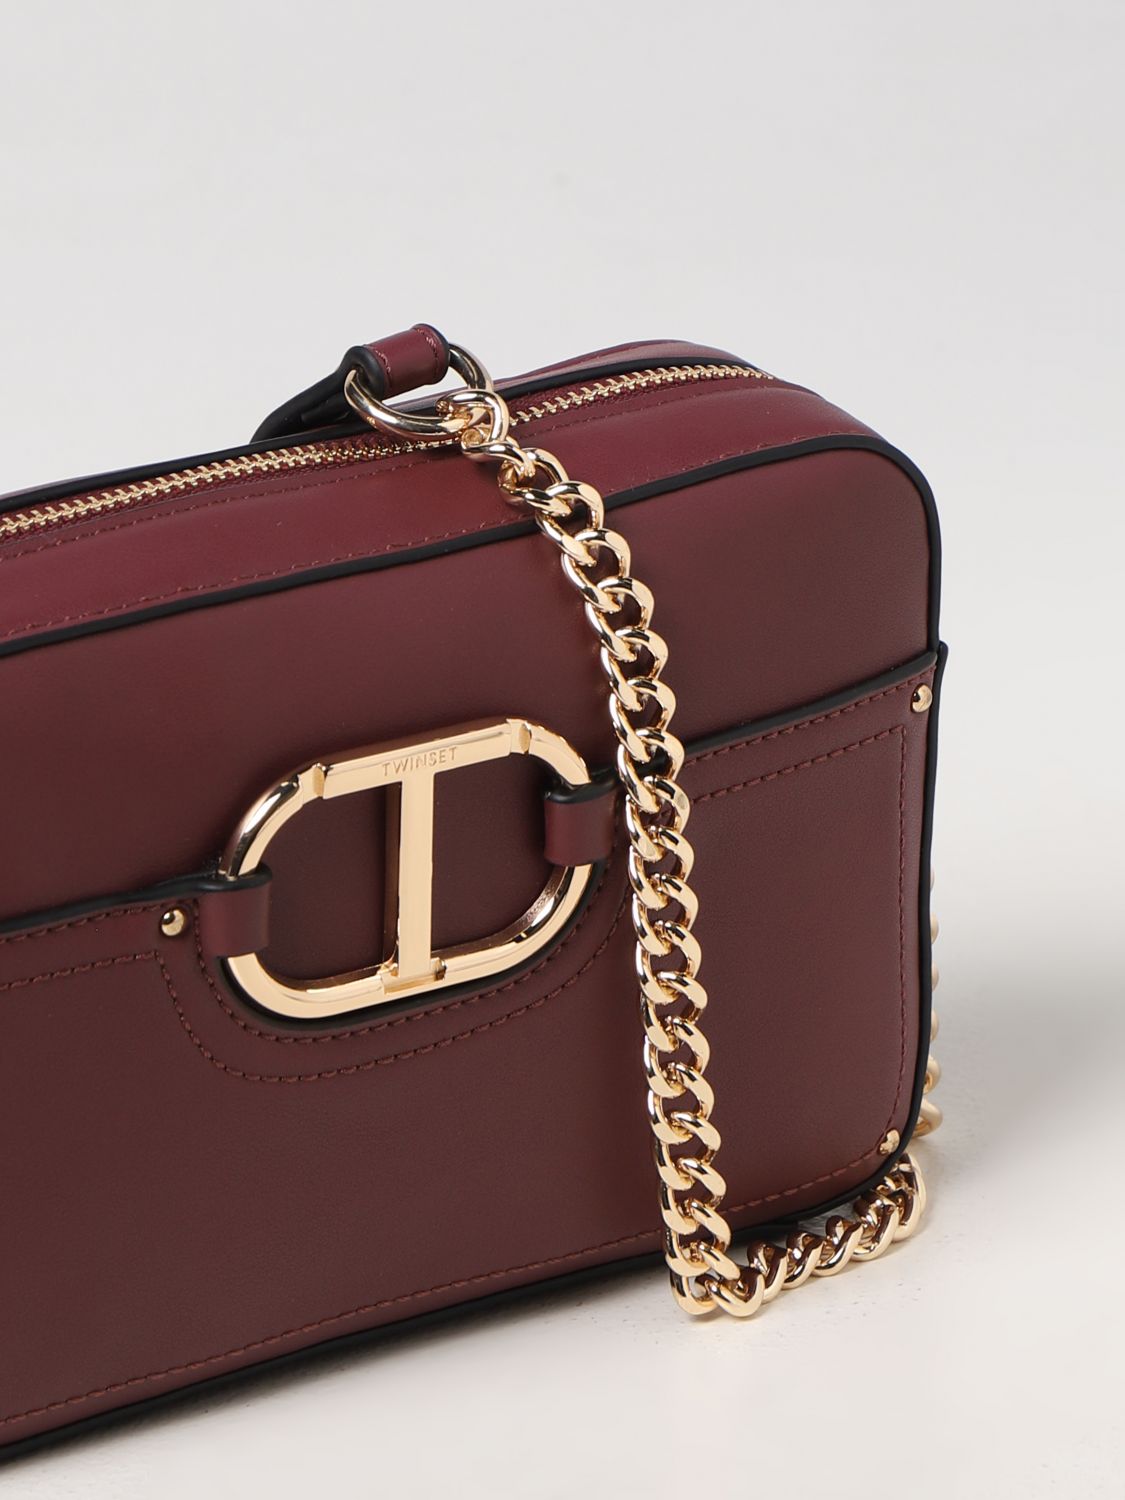 TWINSET: crossbody bags for woman - Burgundy  Twinset crossbody bags  222TB7381 online at